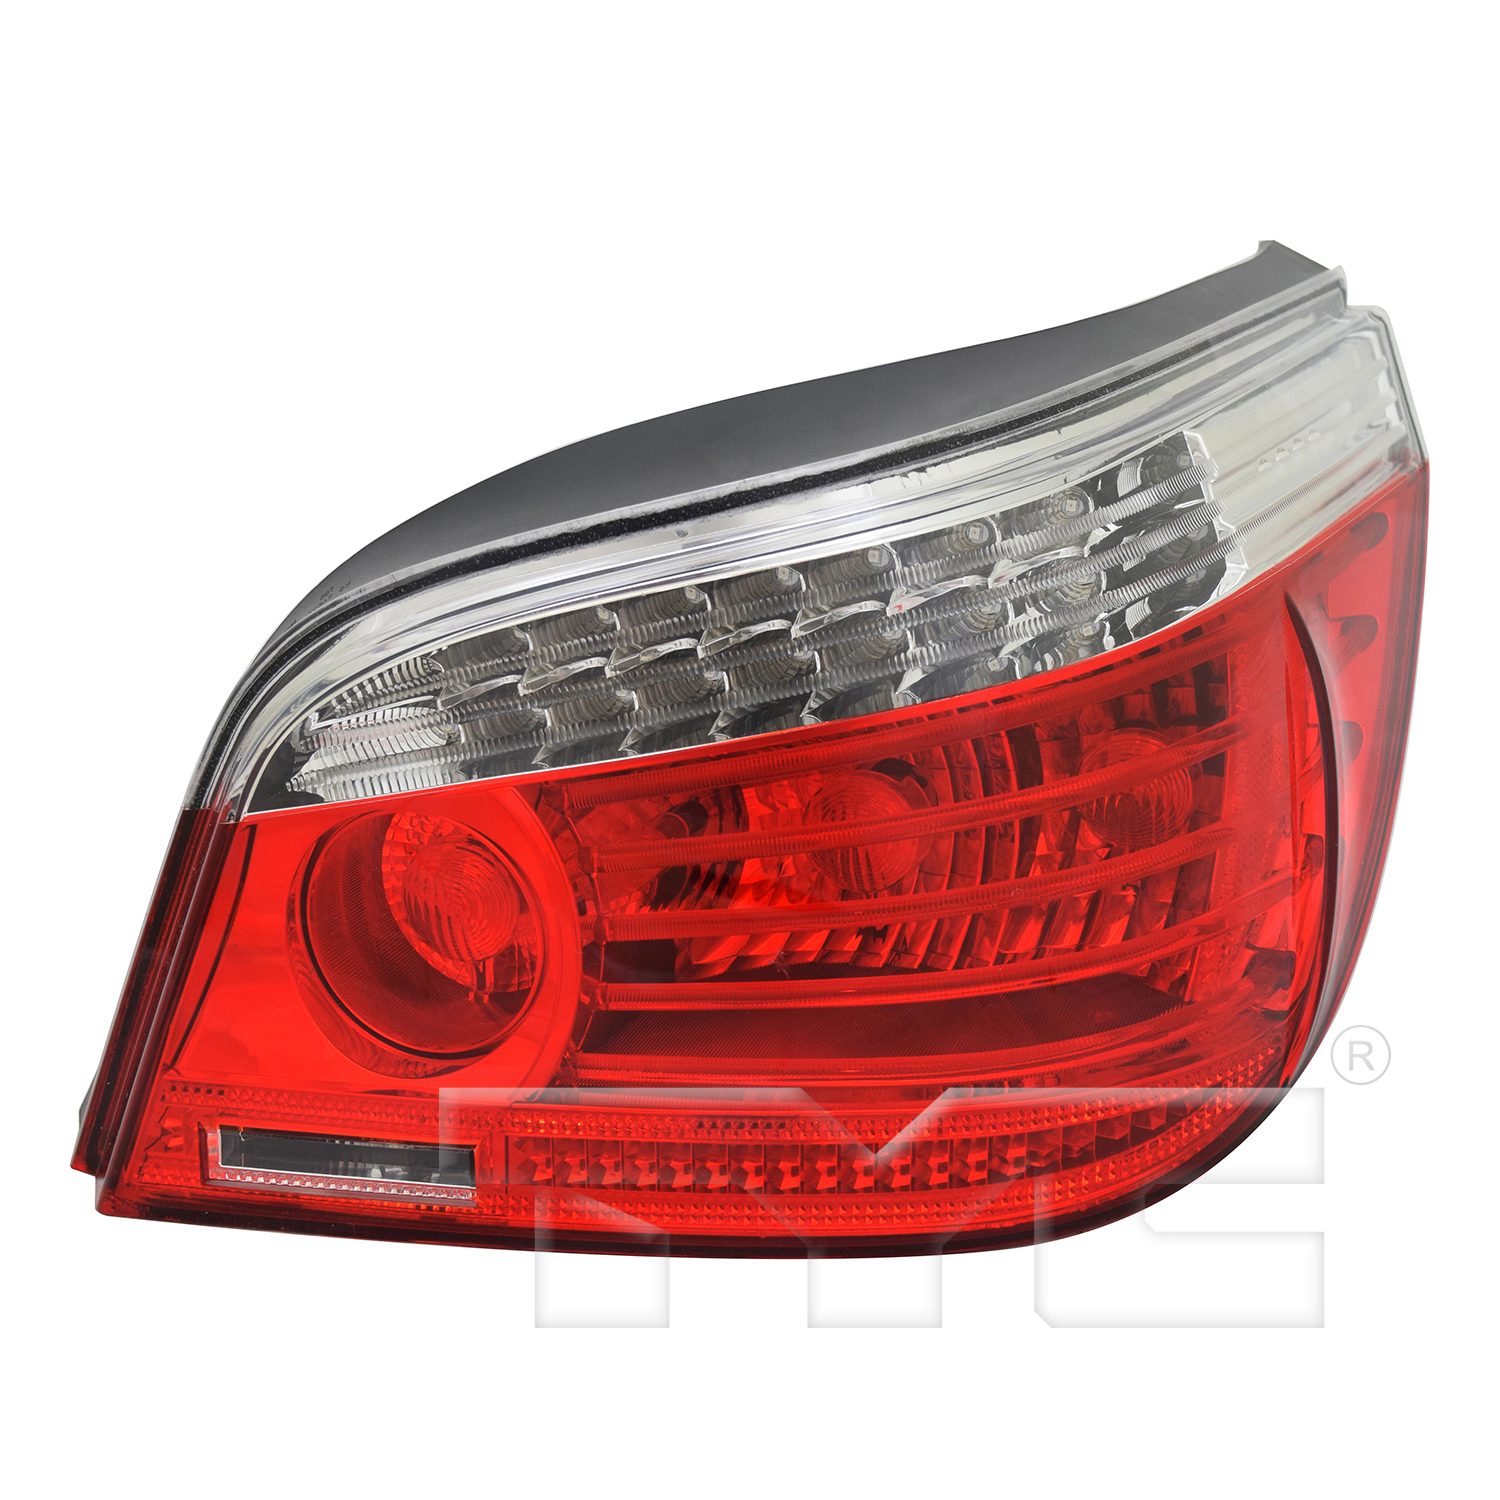 Aftermarket TAILLIGHTS for BMW - 528I, 528i,08-10,RT Taillamp assy